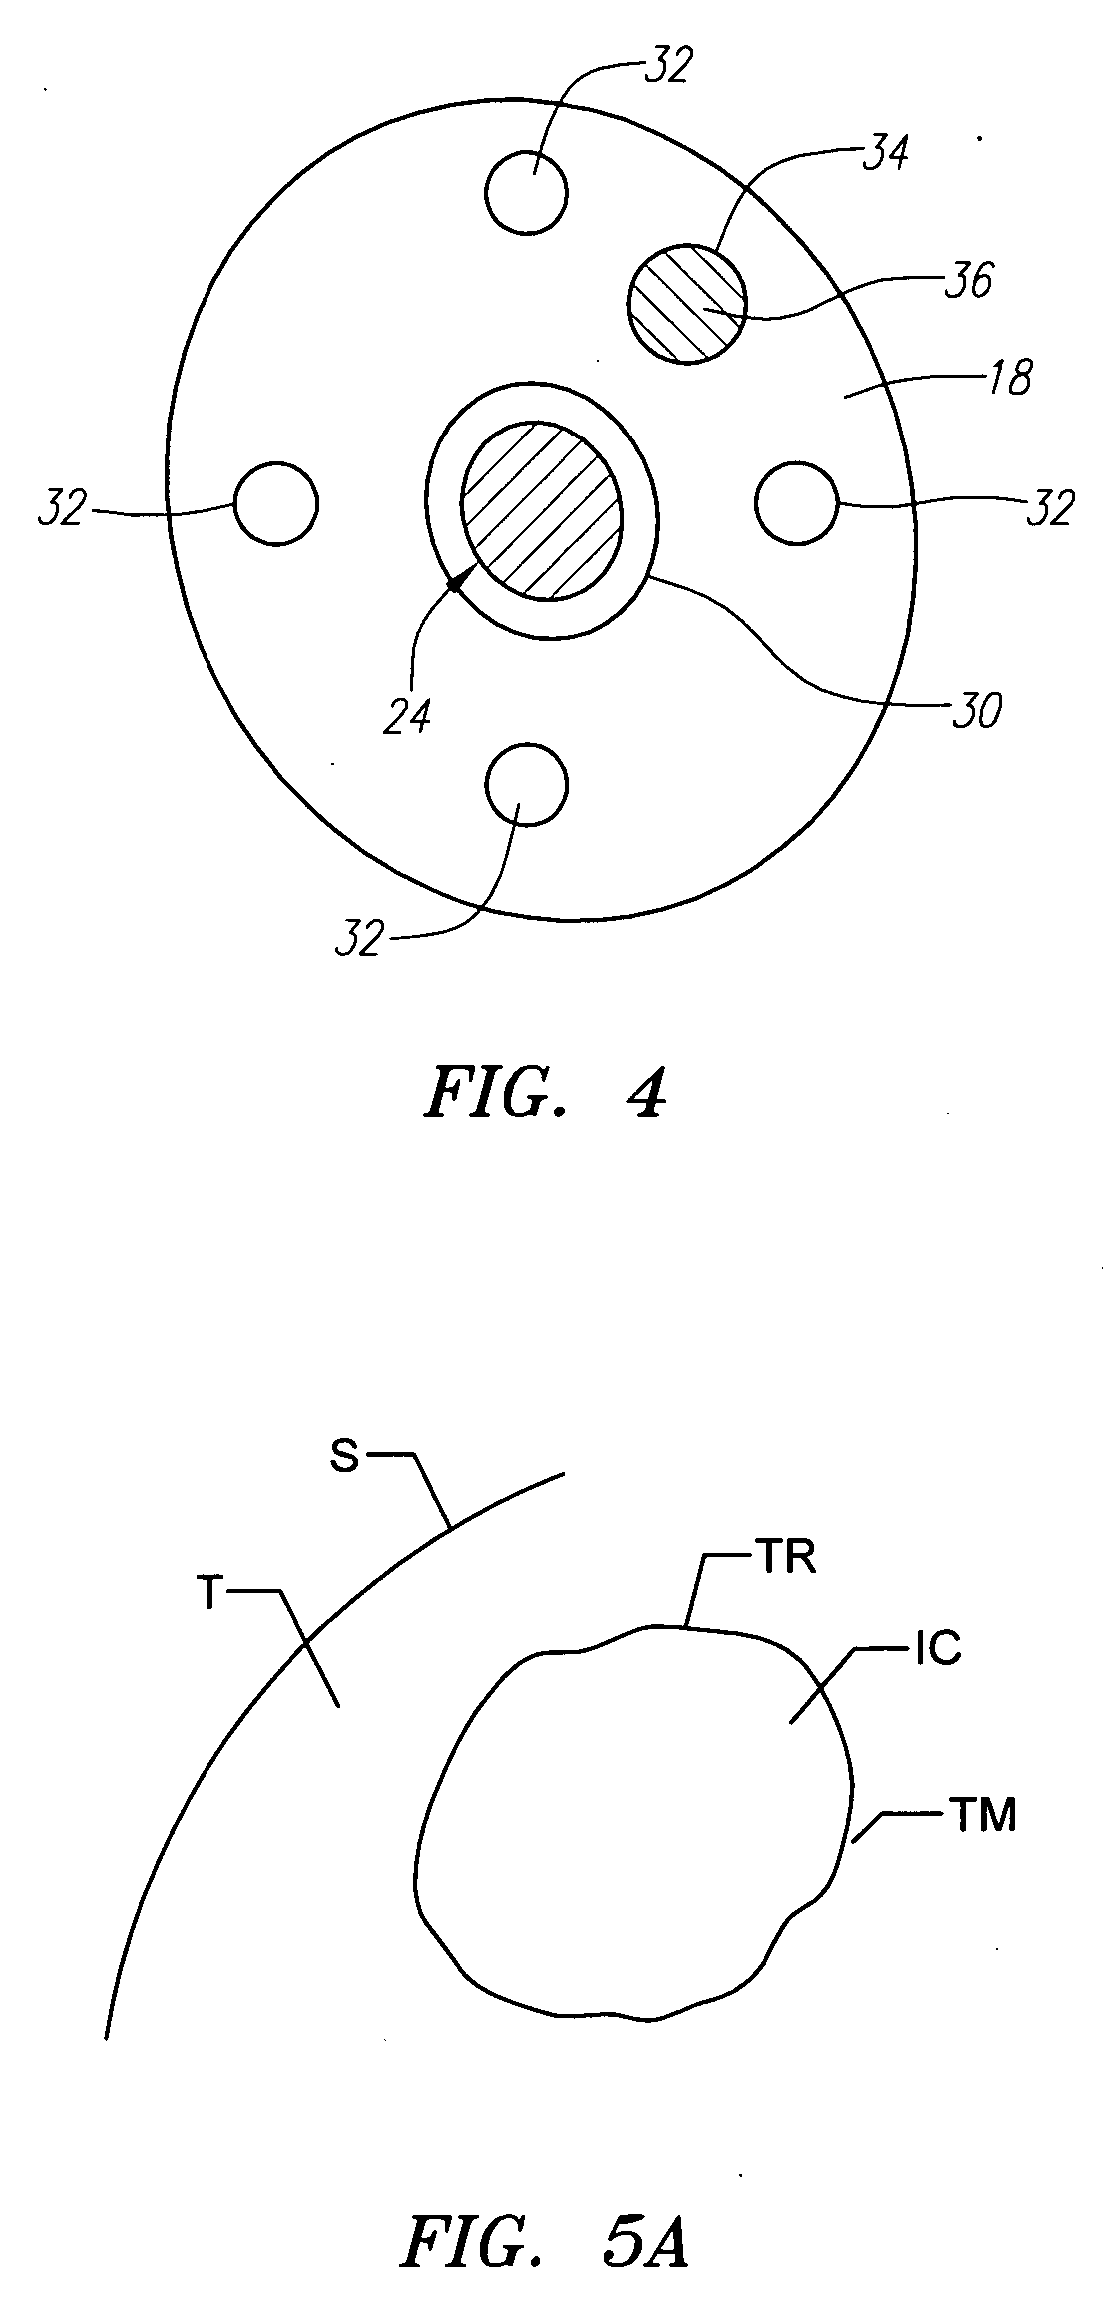 Apparatus and method for performing therapeutic tissue ablation and brachytherapy